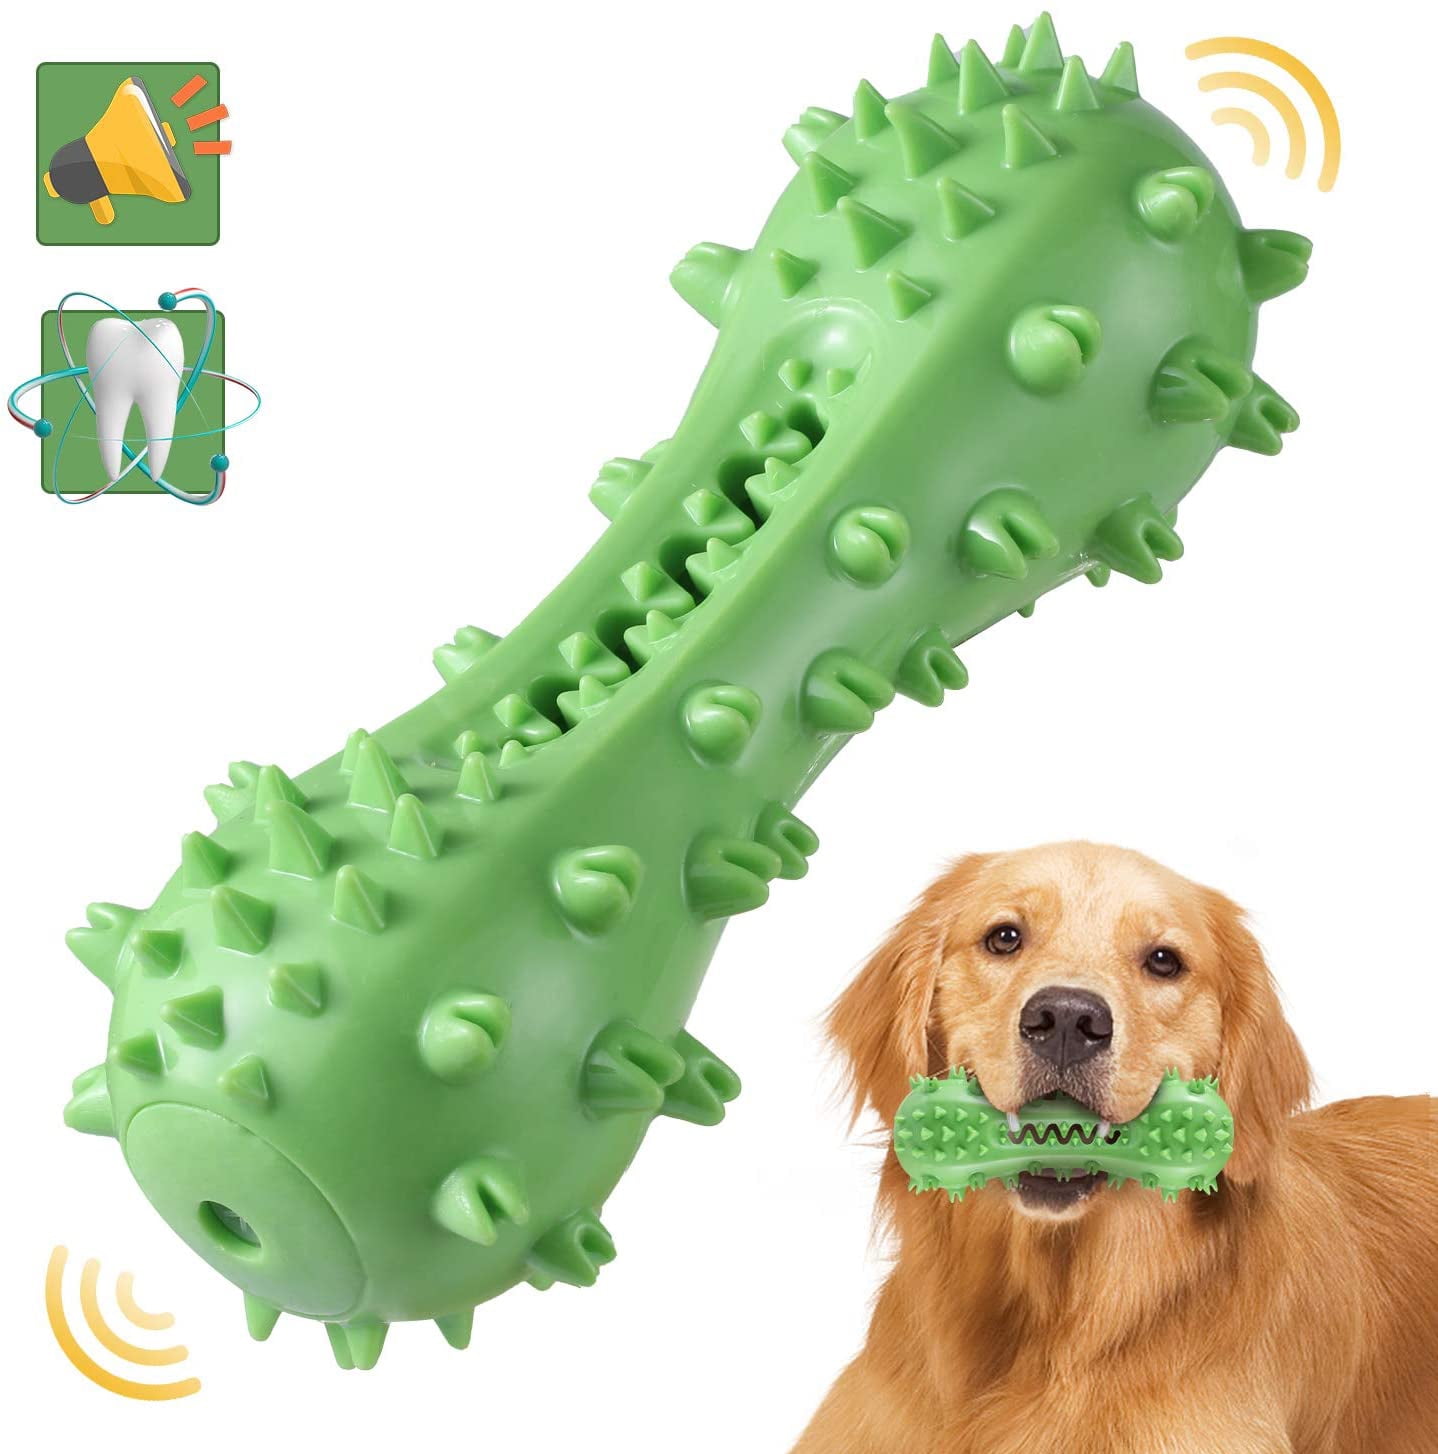 MASBRILL Dog Squeaky Toy Indestructible Dog Chew Toys for Large Medium  Aggressive Chewers, Tough Dog Teeth Cleaning Toys Bite Resistant, Natural  Rubber Interactive Dog Toys for Boredom - Red 